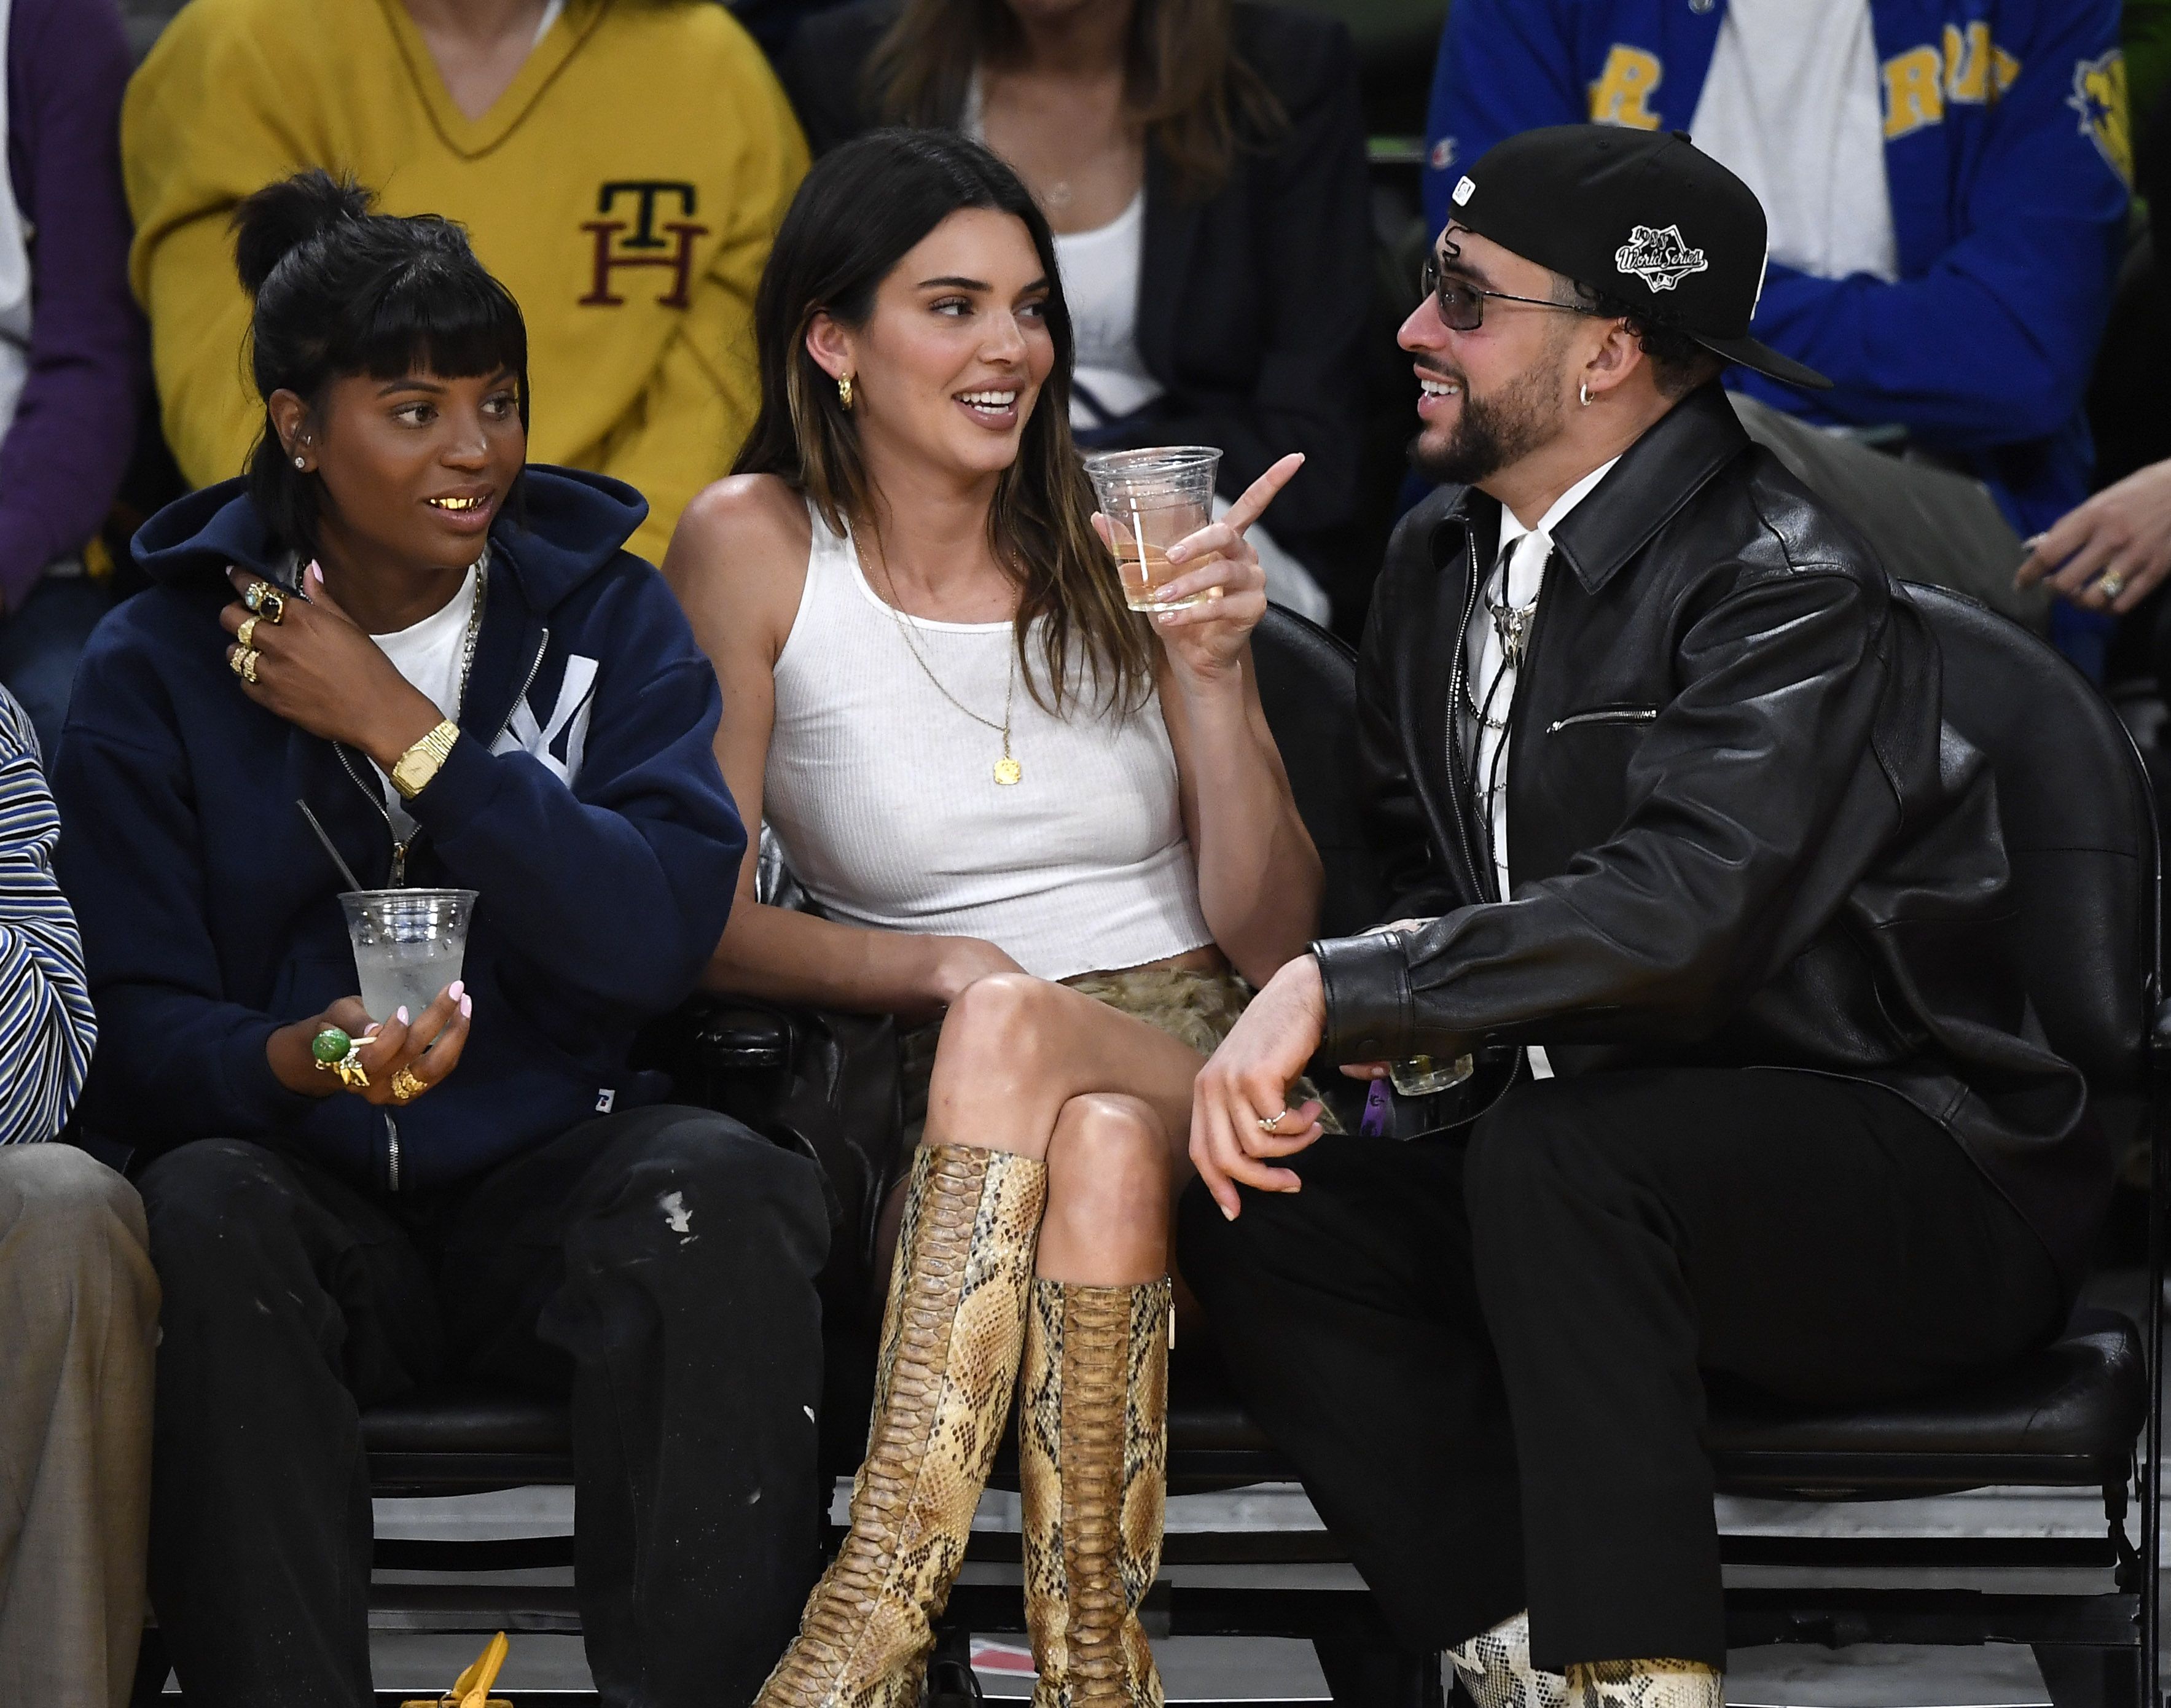 Kendall Jenner and Bad Bunny were spotted at the Lakers playoff